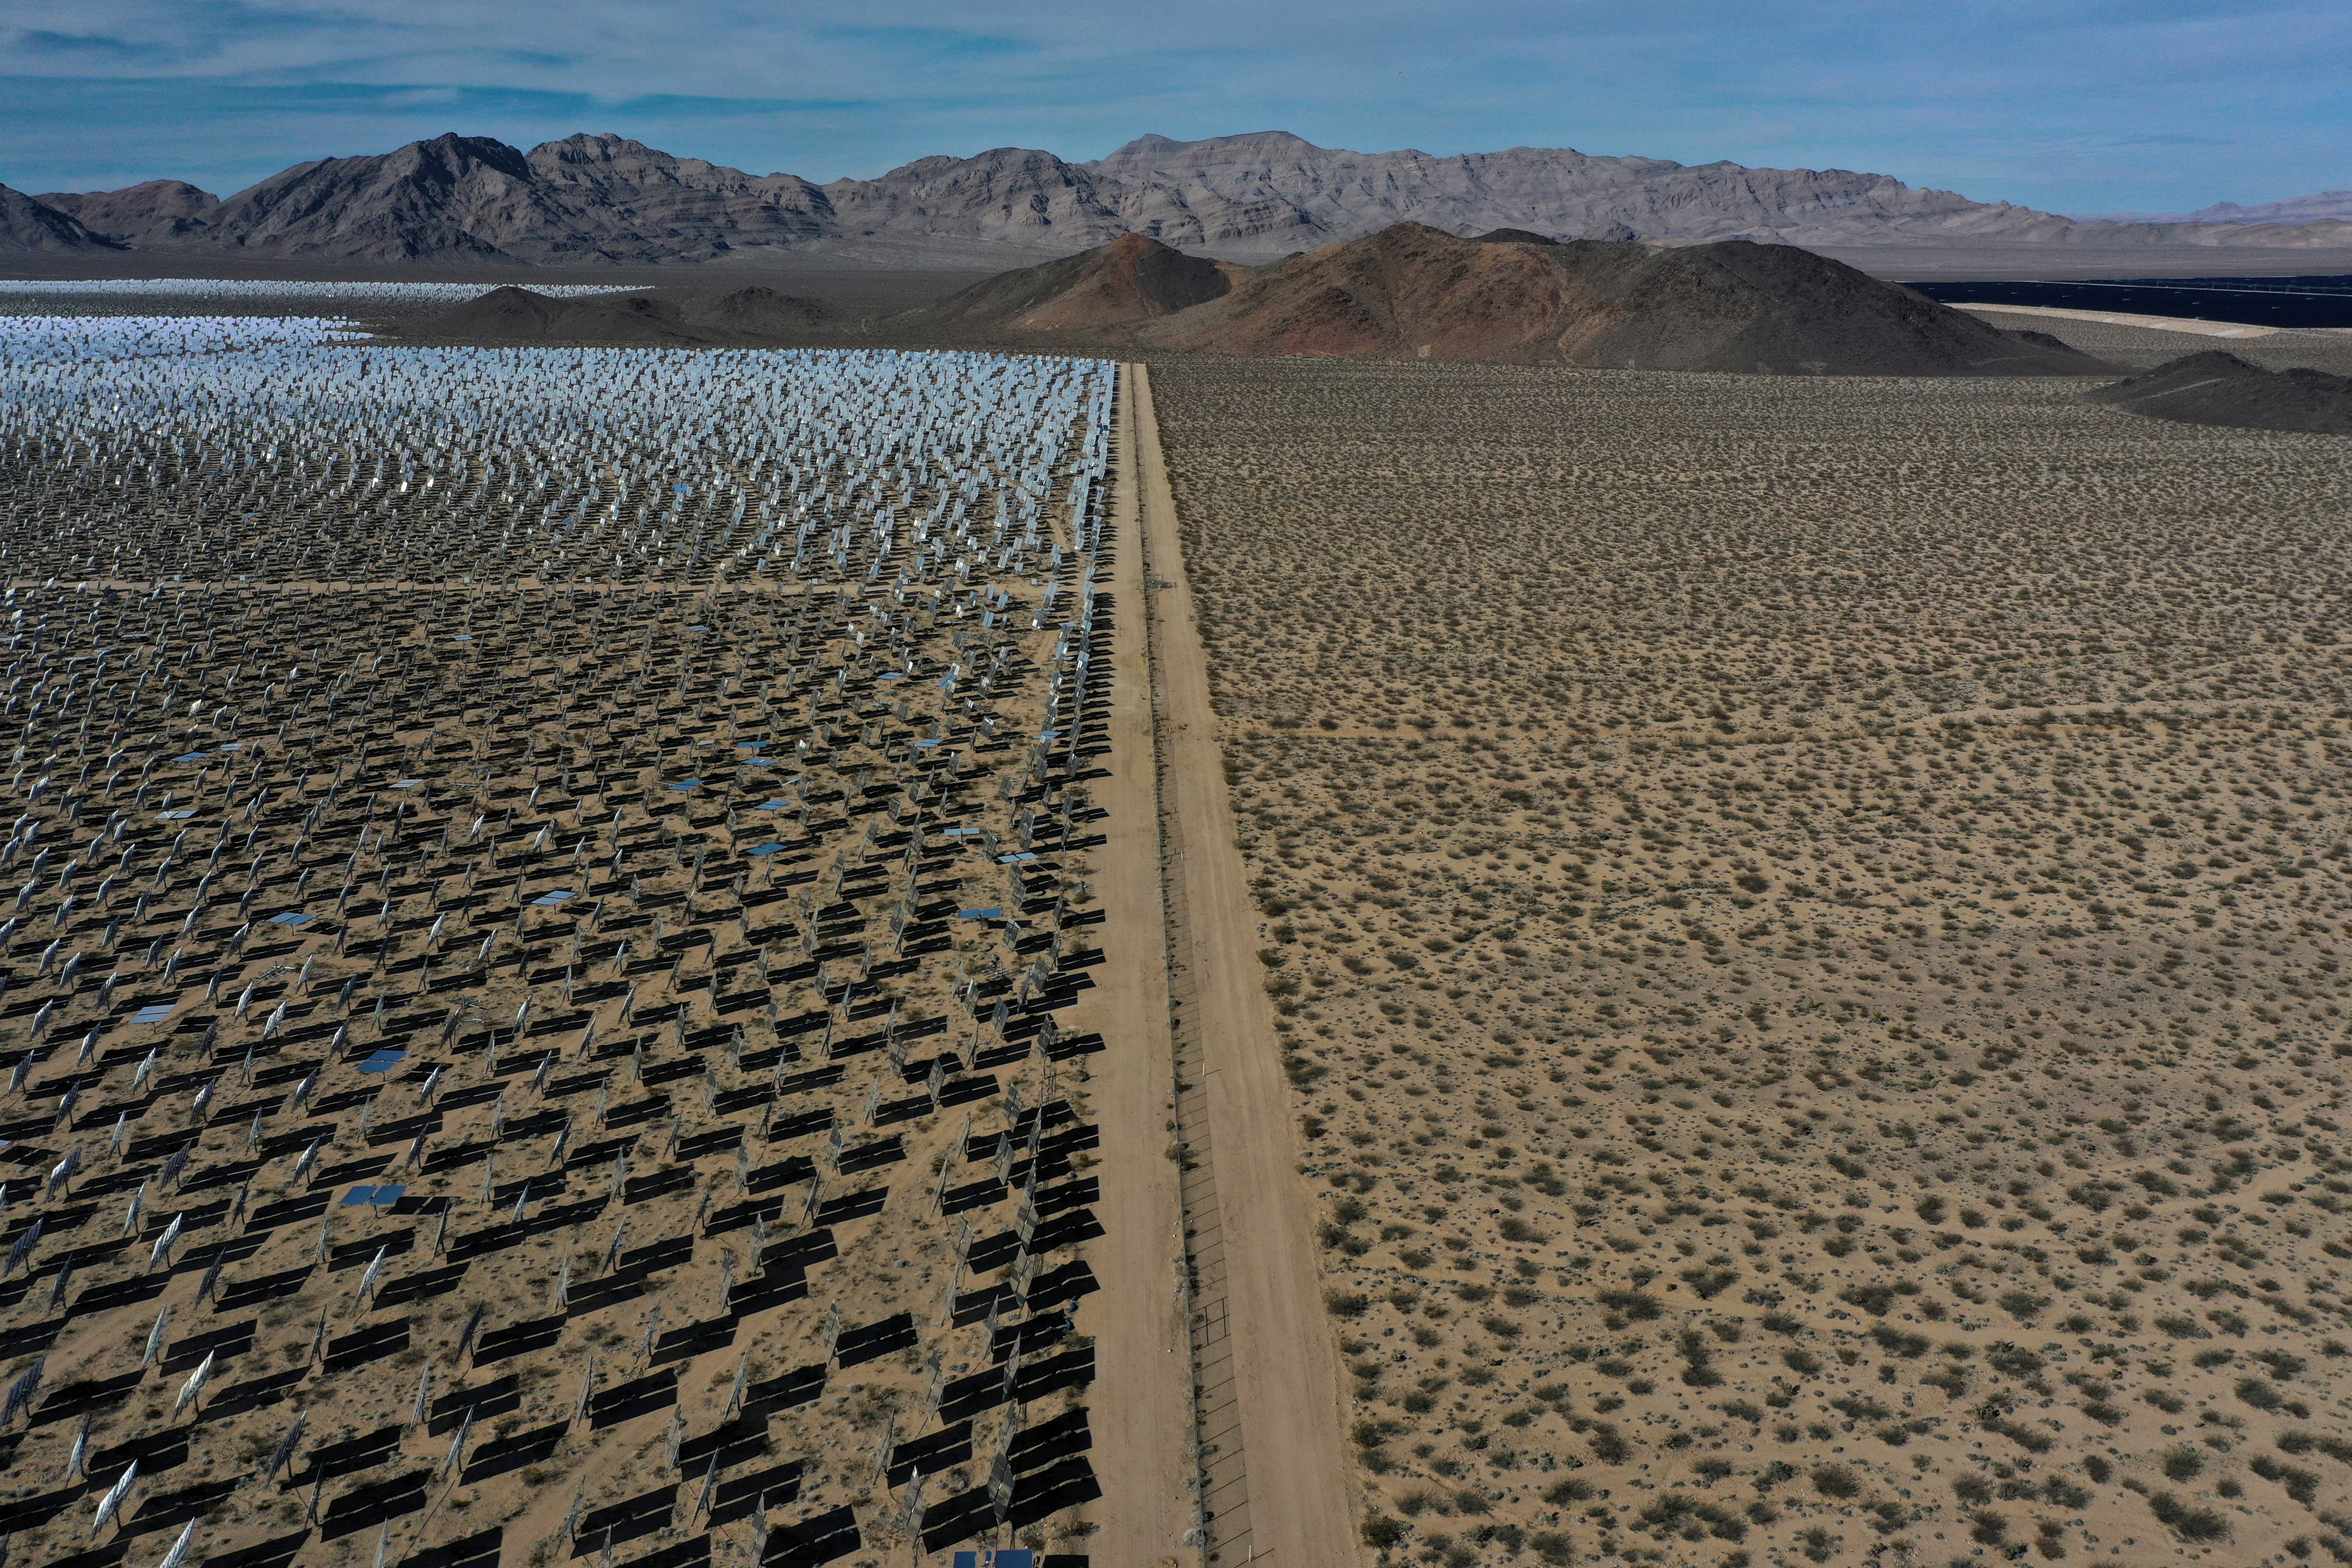 An aerial view of the Ivanpah Solar Electric Generating System in San Bernardino County